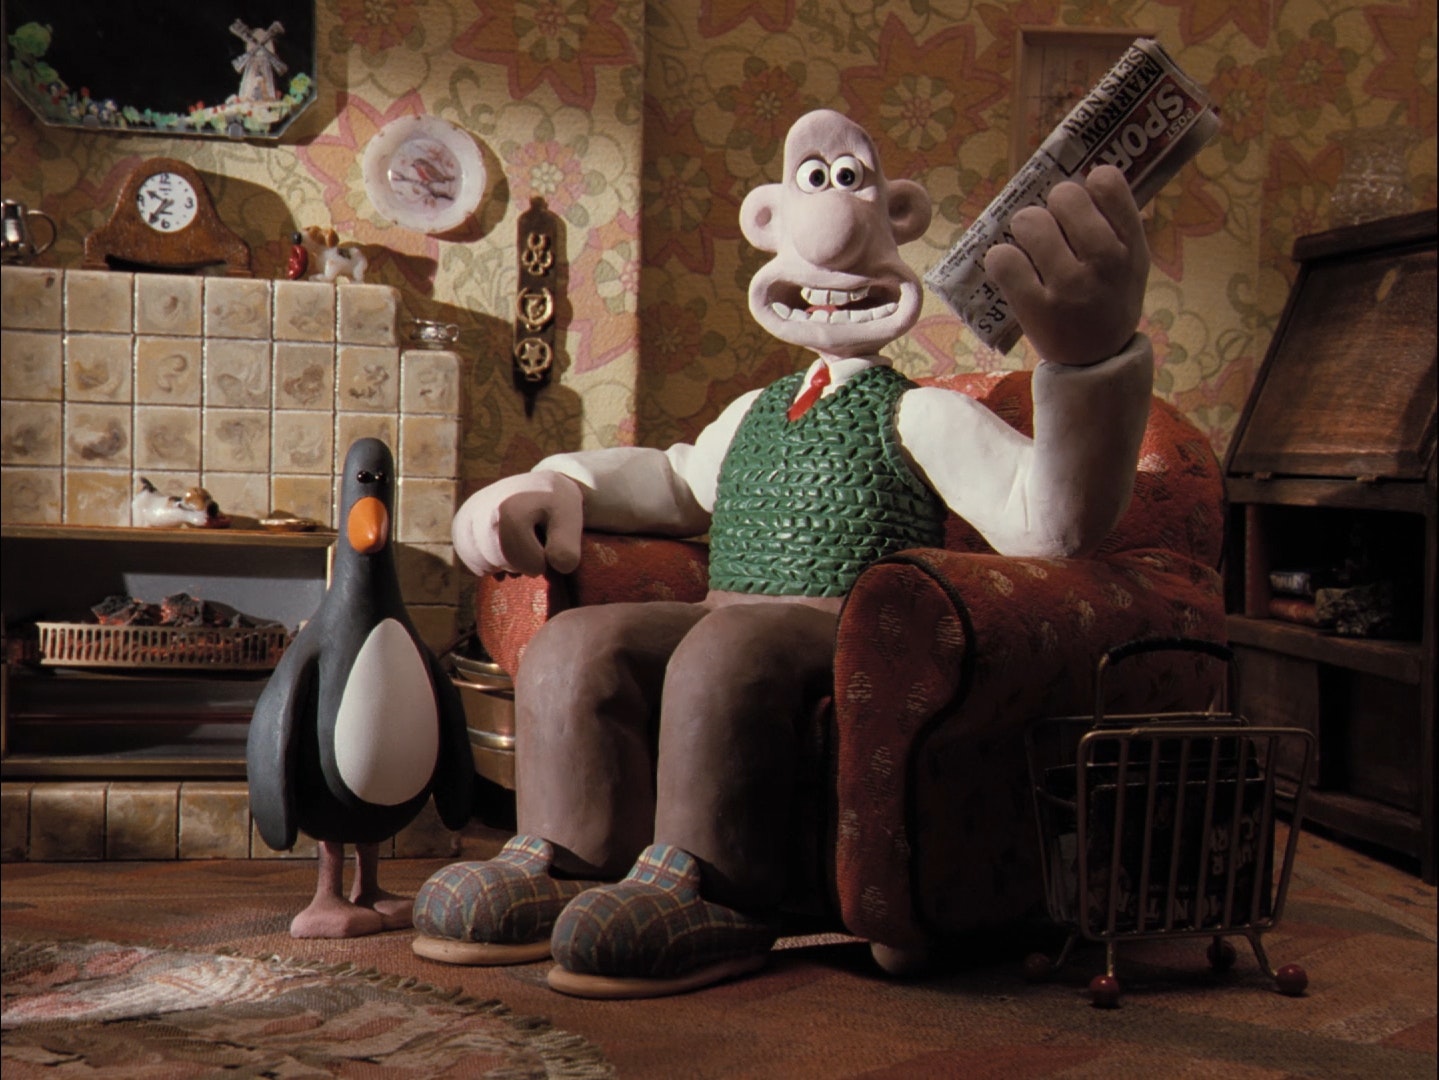 Aardman's Best Film Is a Monster Movie With Their Most Iconic Characters